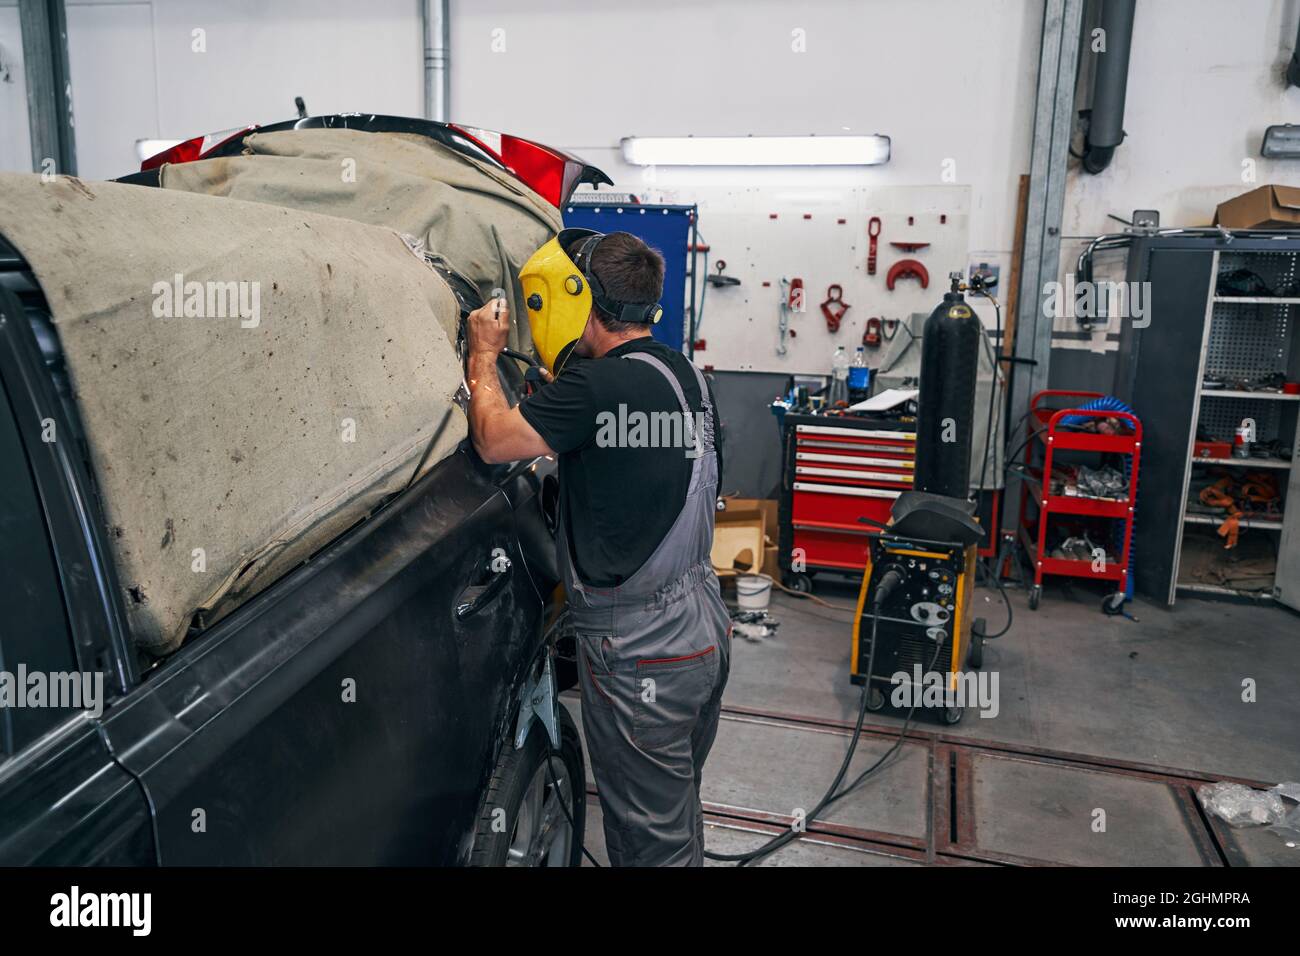 Mechanic welding a part of car under cover Stock Photo